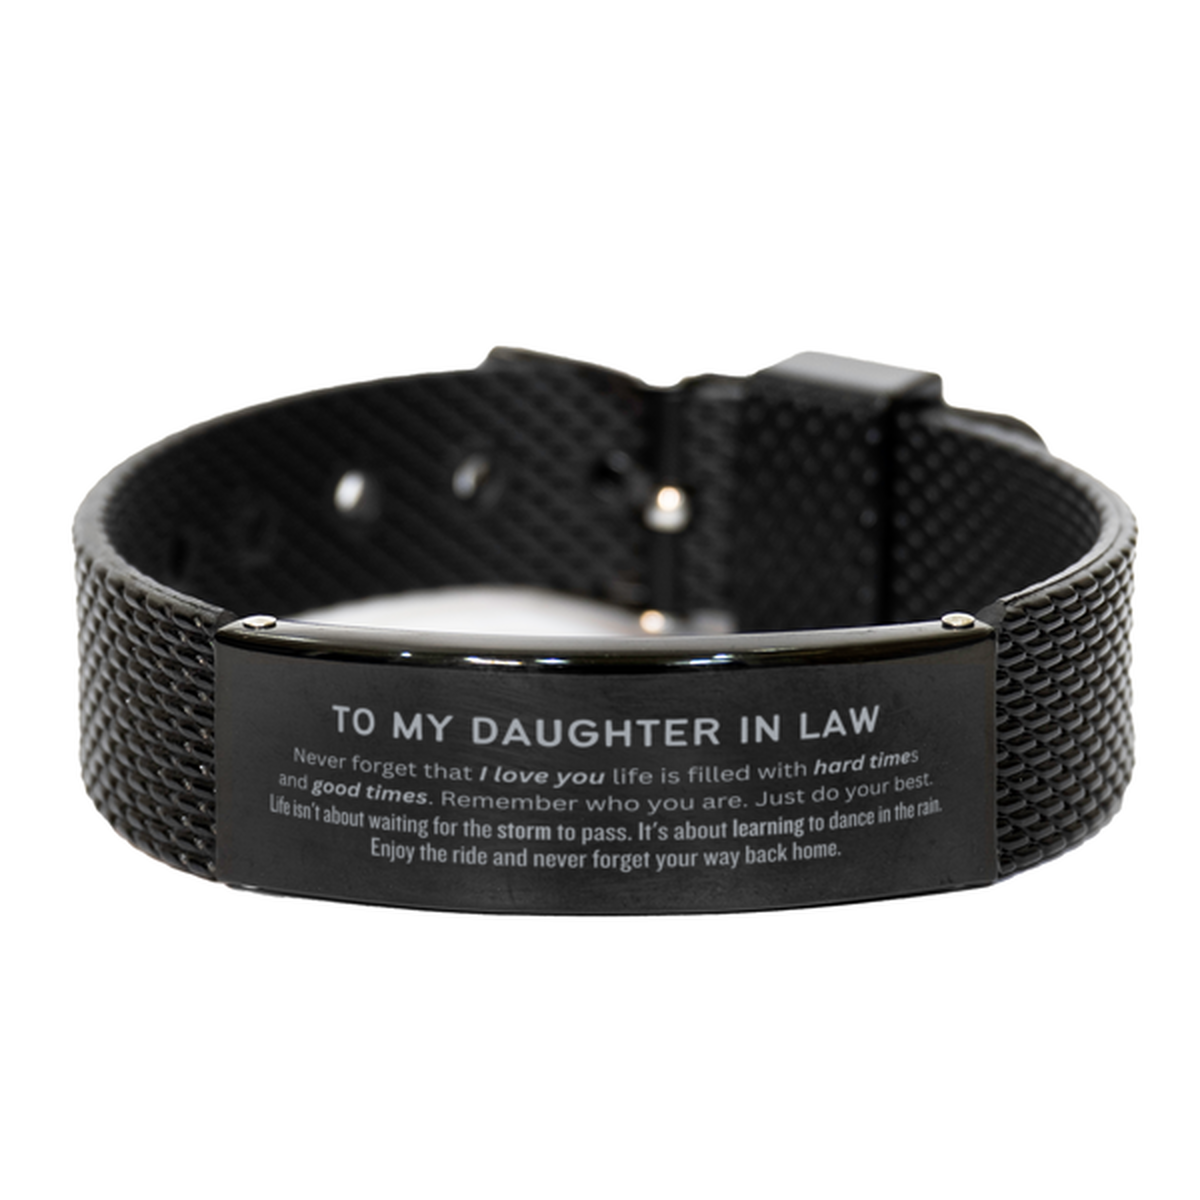 Christmas Daughter In Law Black Shark Mesh Bracelet Gifts, To My Daughter In Law Birthday Thank You Gifts For Daughter In Law, Graduation Unique Gifts For Daughter In Law To My Daughter In Law Never forget that I love you life is filled with hard times an